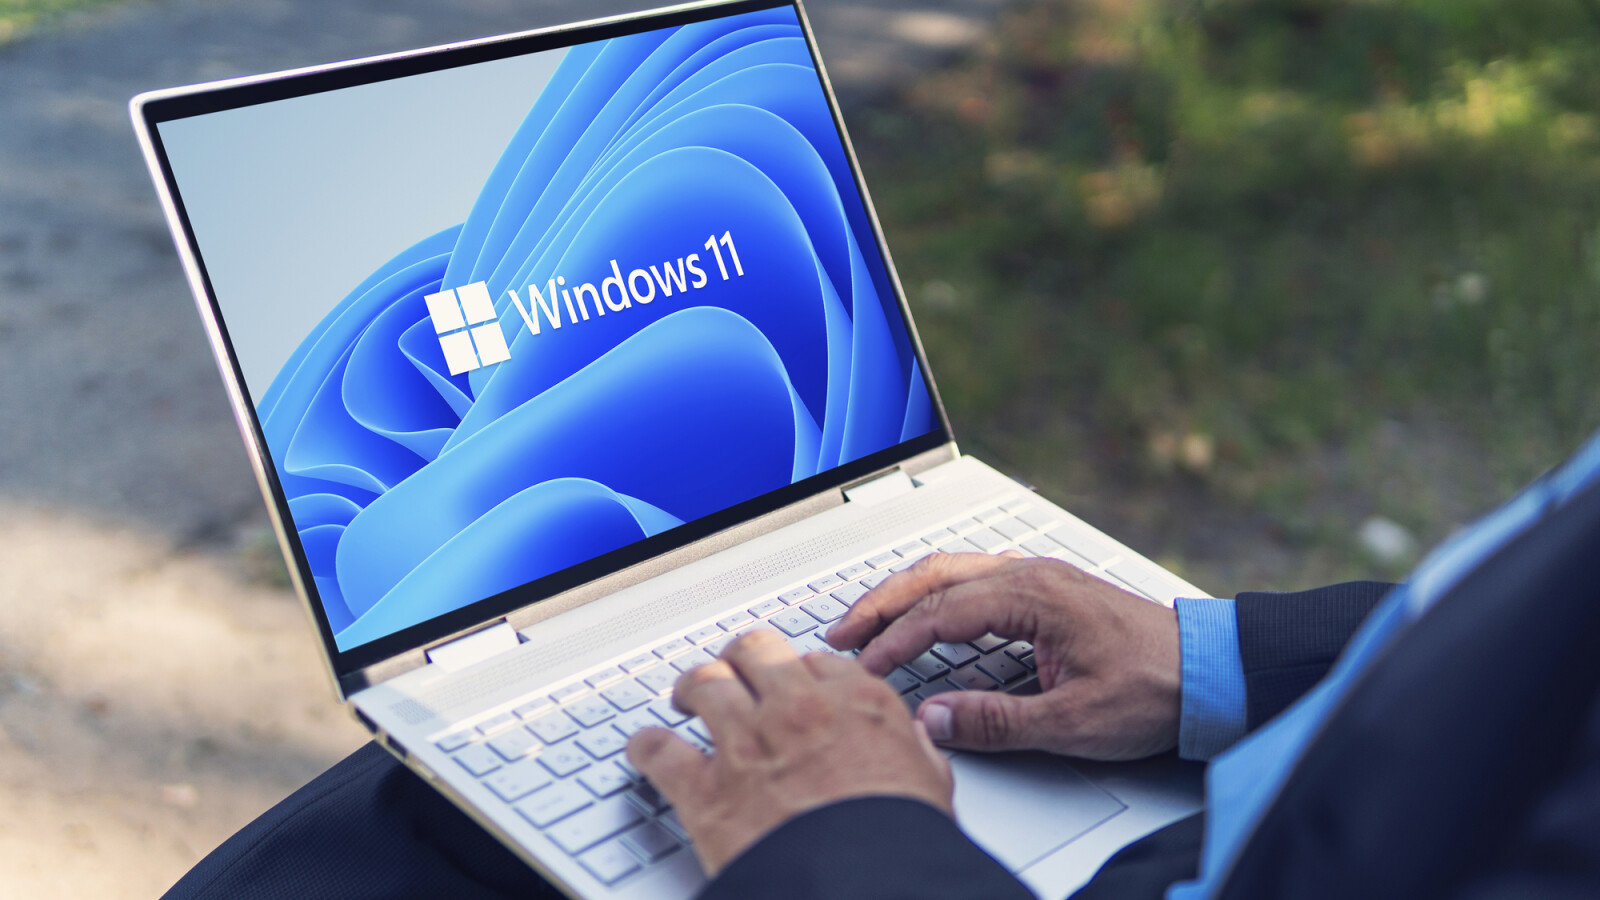 New Windows 11 Update: If you now have to buy a new PC